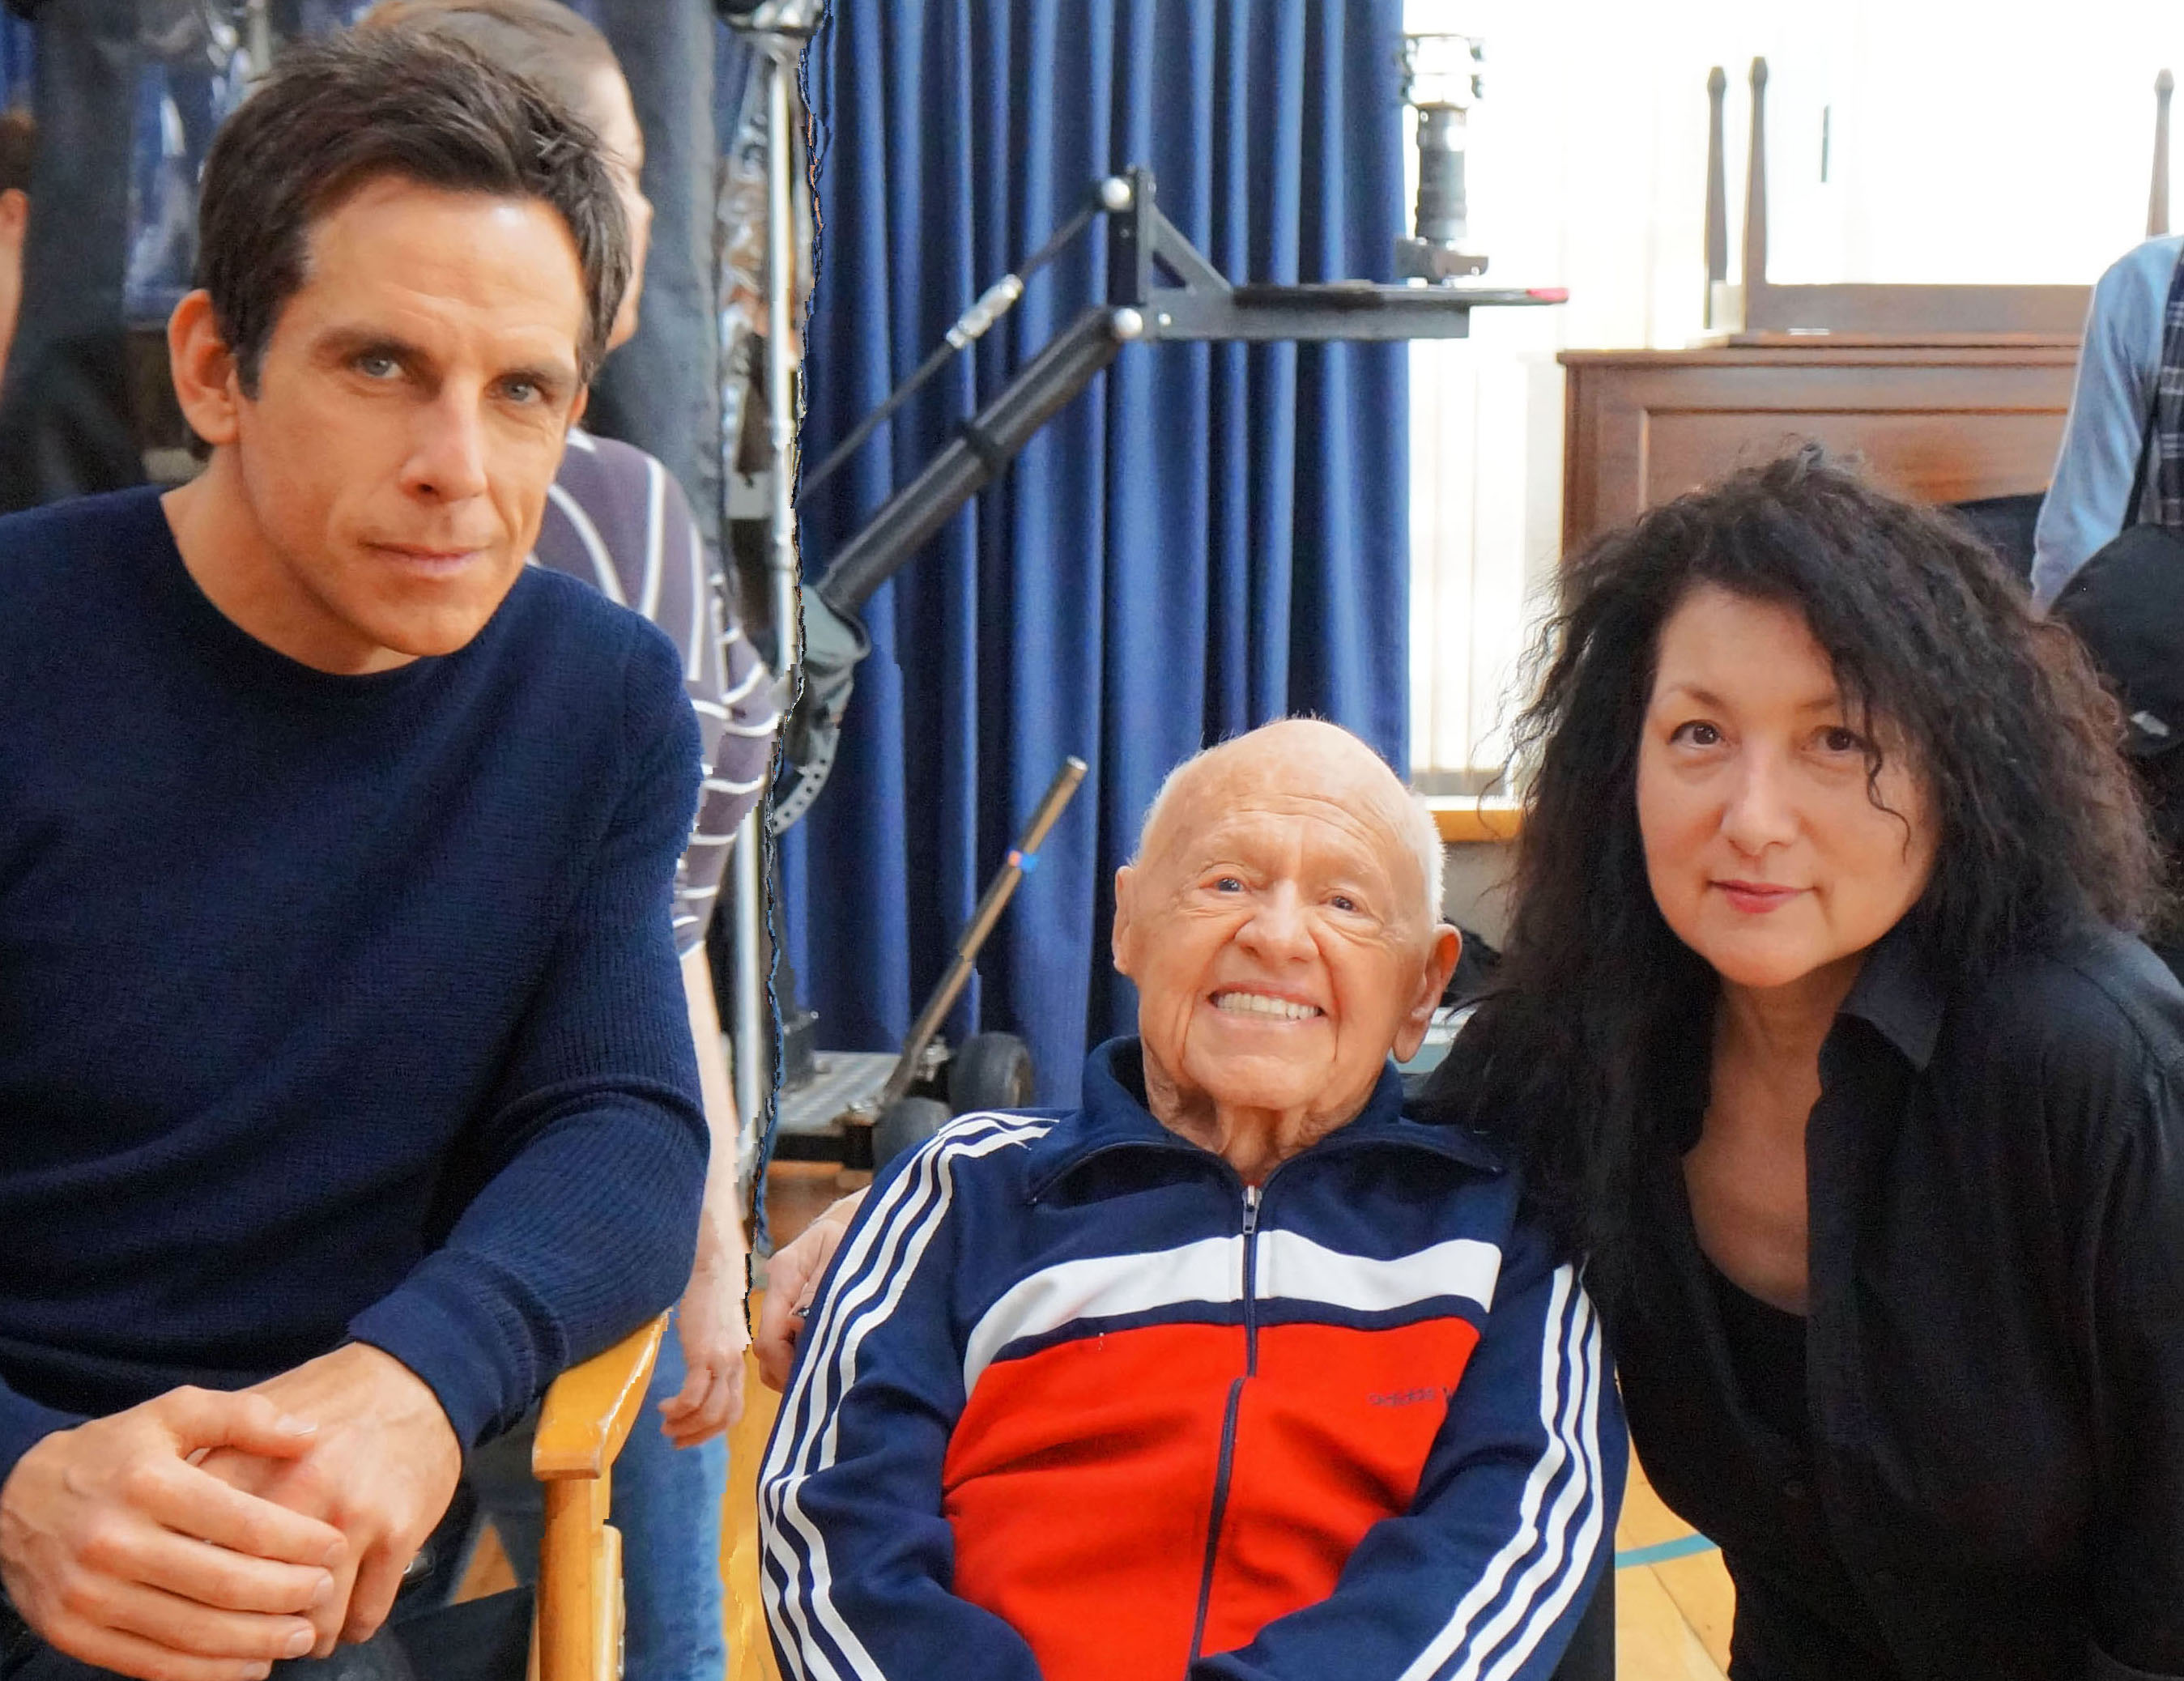 (right to left) Charlene Rooney with father-in-law Mickey Rooney and Ben Stiller